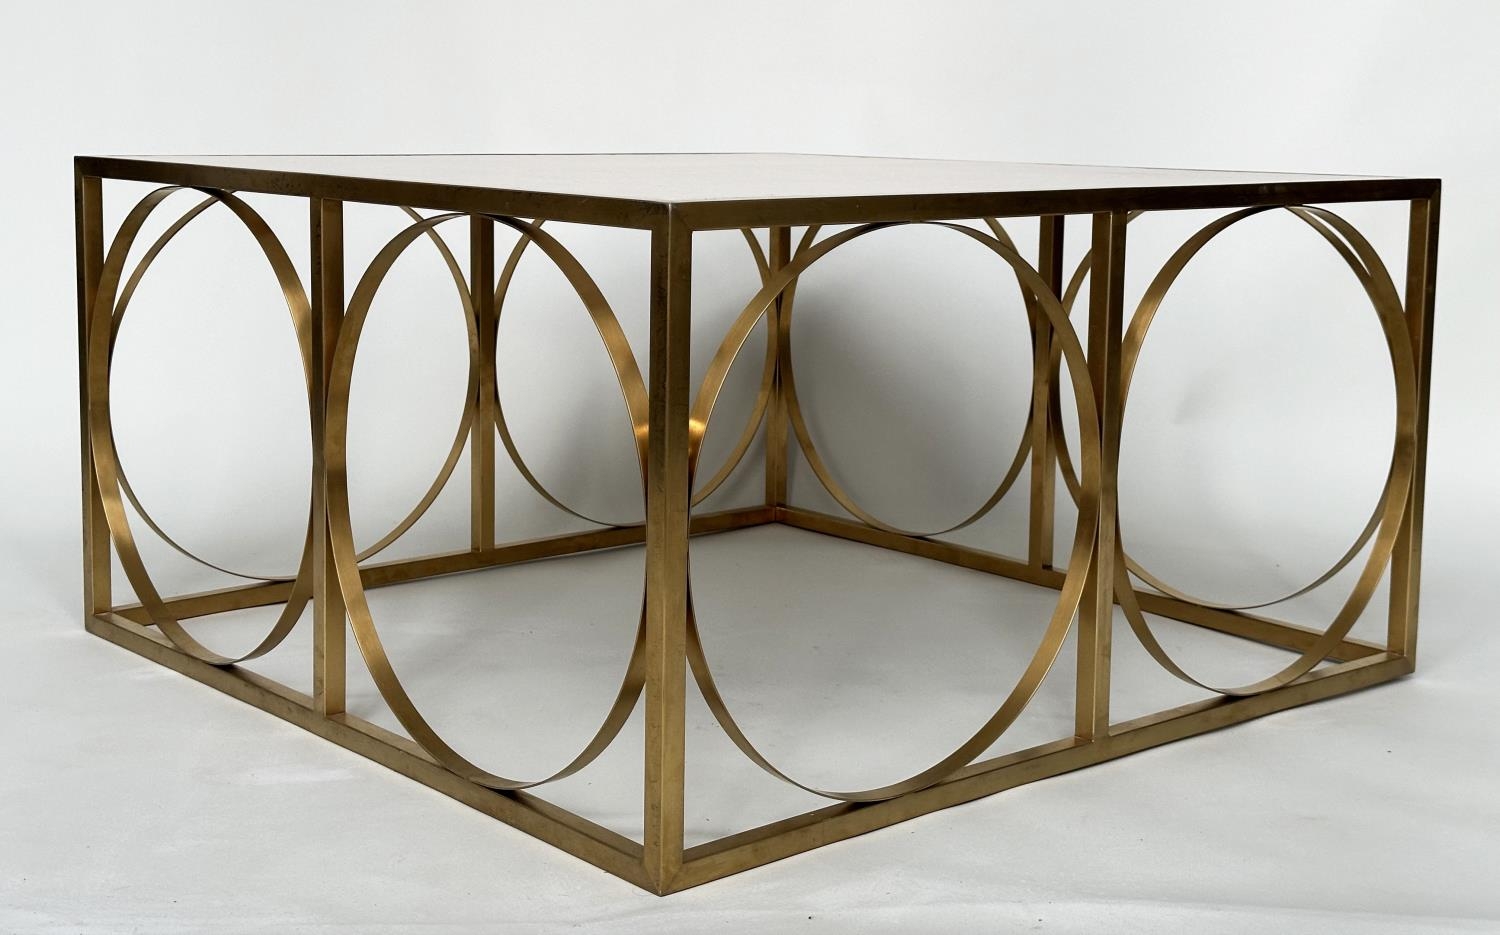 LOW TABLE, square gilded metal framed with reconstituted travertine marble, 88cm x 88cm x 45cm H. - Image 2 of 6